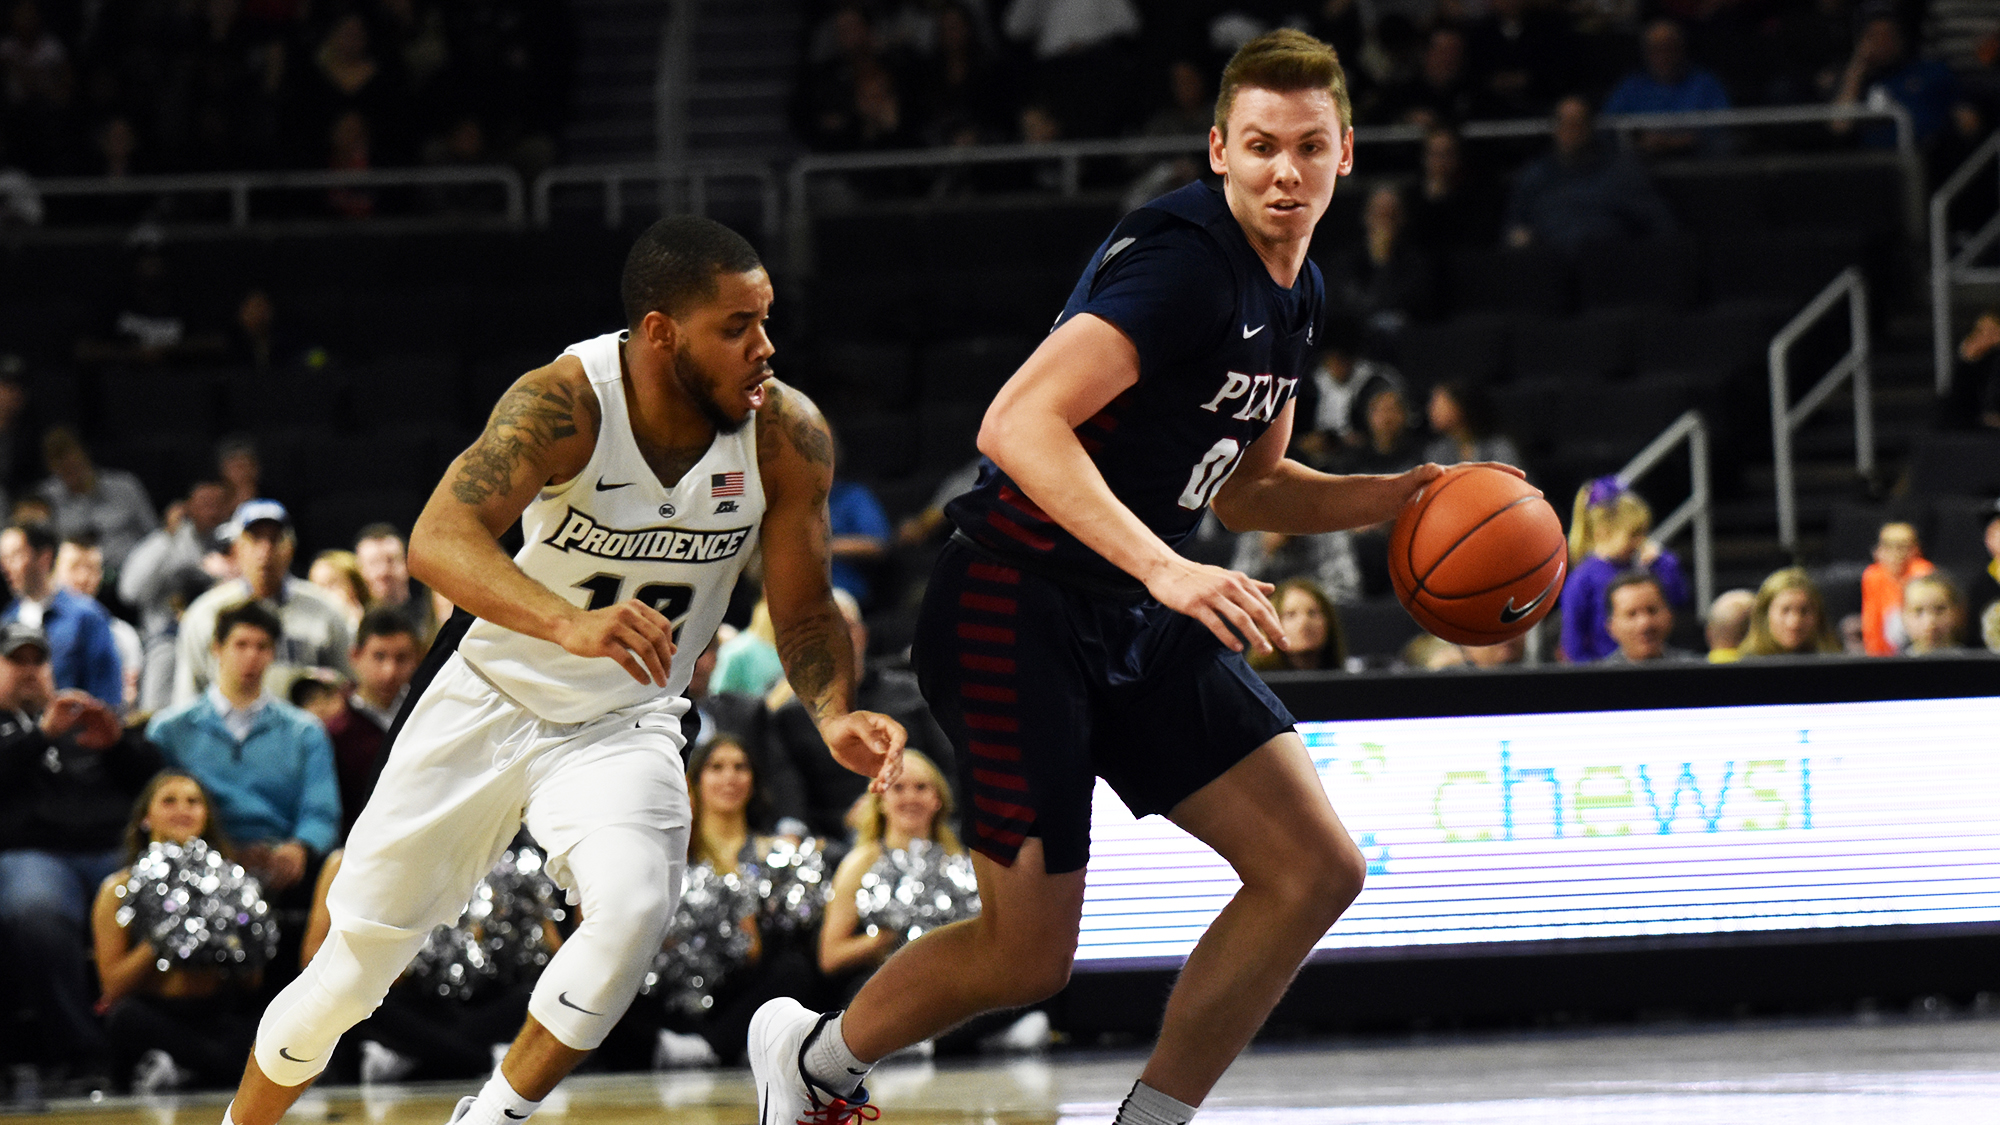 It was raining 3s in Penn’s win over the Friars | Penn Today